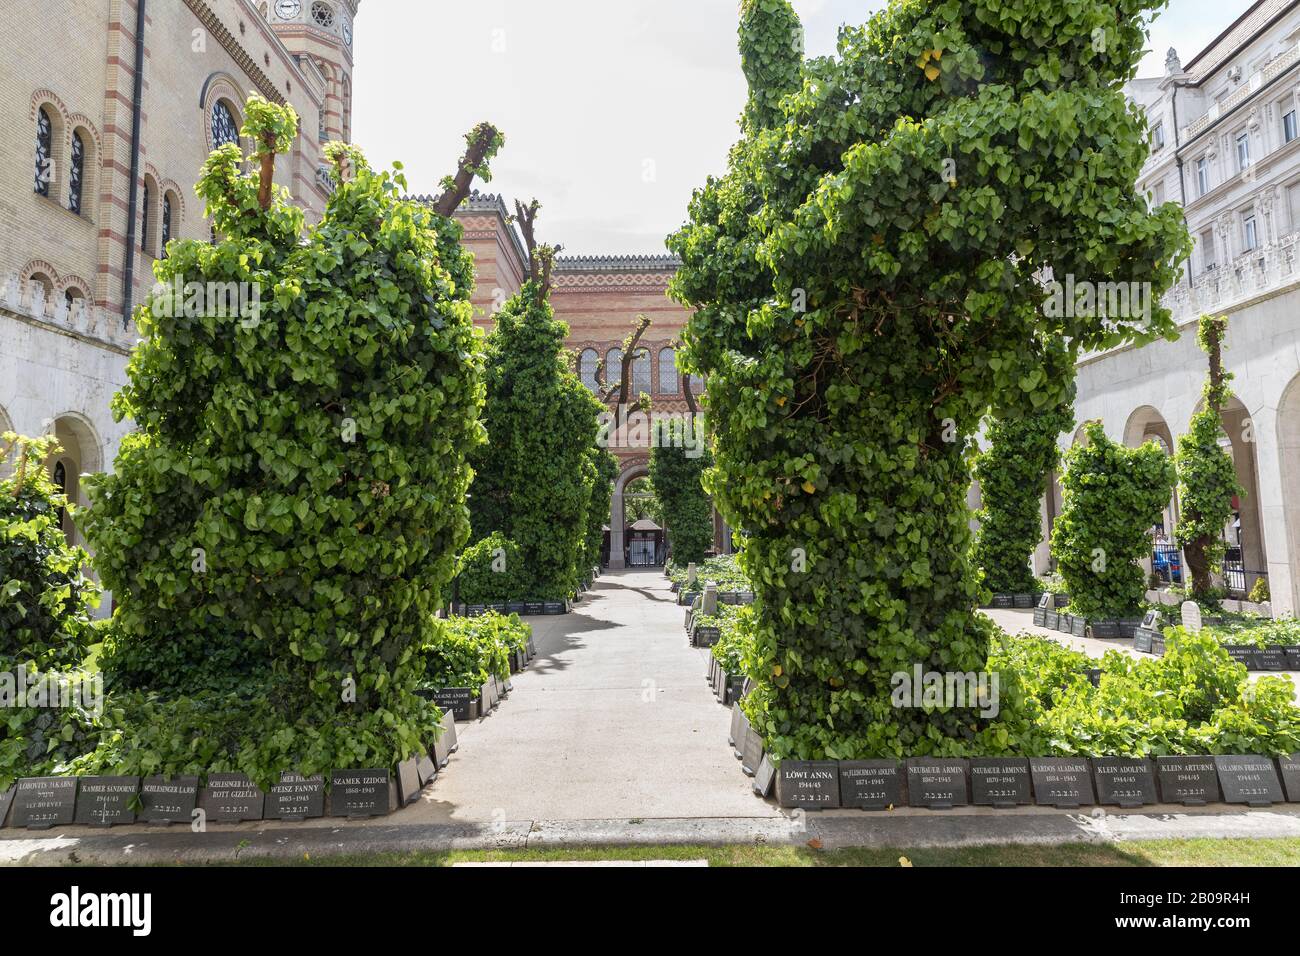 Budapest, Hungary - 25 April 2019: Dohány Street Synagogue historical Cemetery (also known as the Great Synagogue or Tabakgasse), Hungary Stock Photo